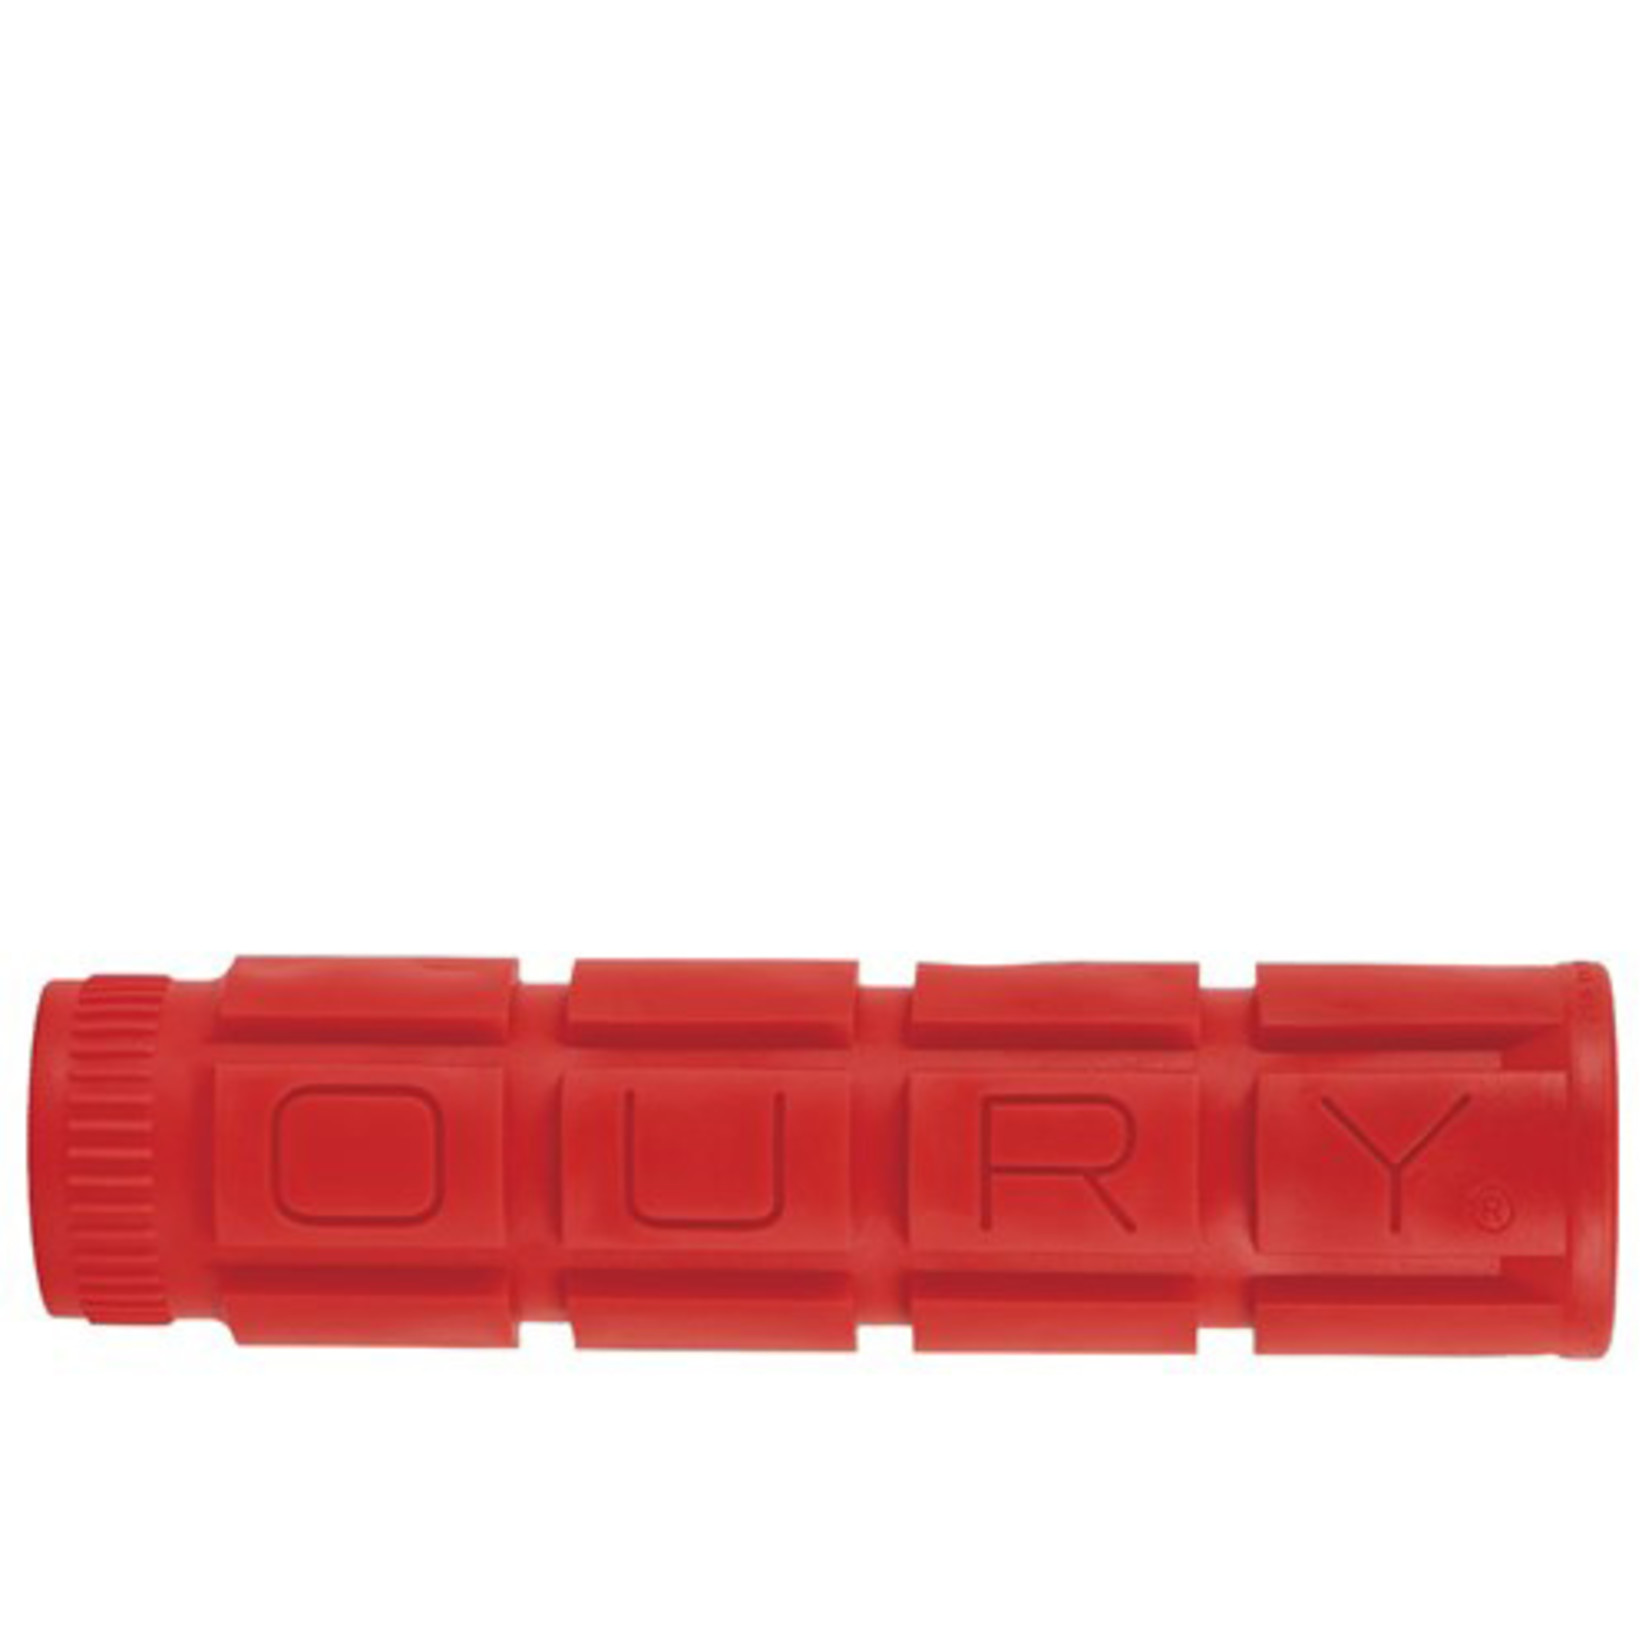 Oury Oury Single Compound Bike Handlebar Grips V2 - Anti-Vibration - 135mm - Red